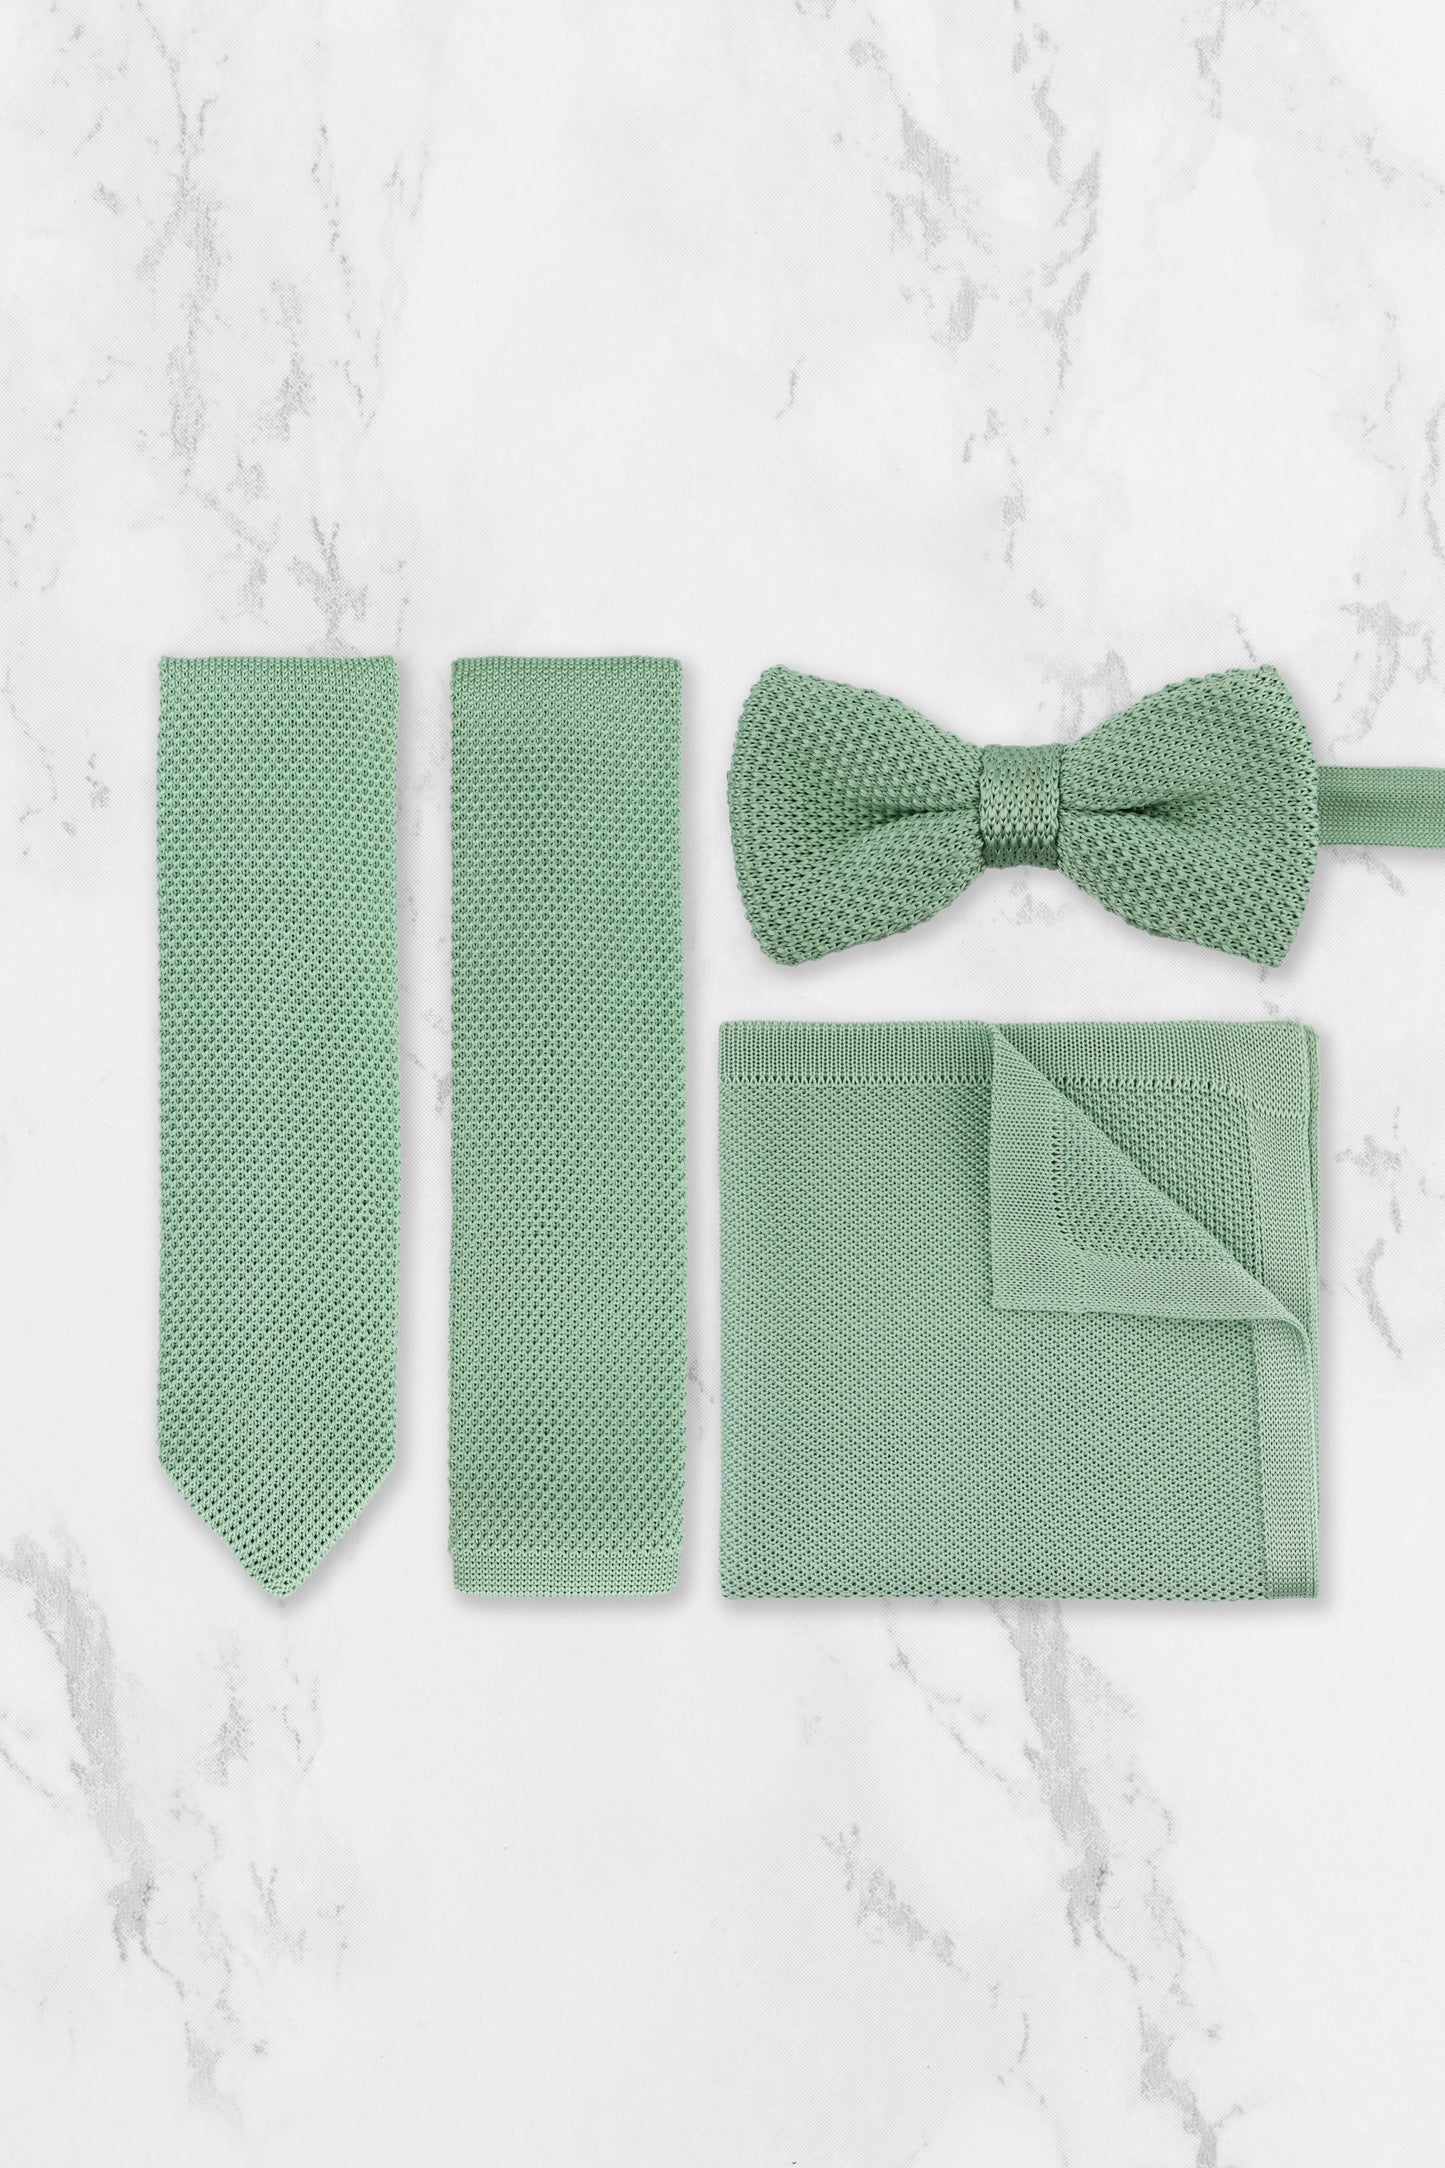 100% Polyester Knitted Child Bow Tie - Sage Green